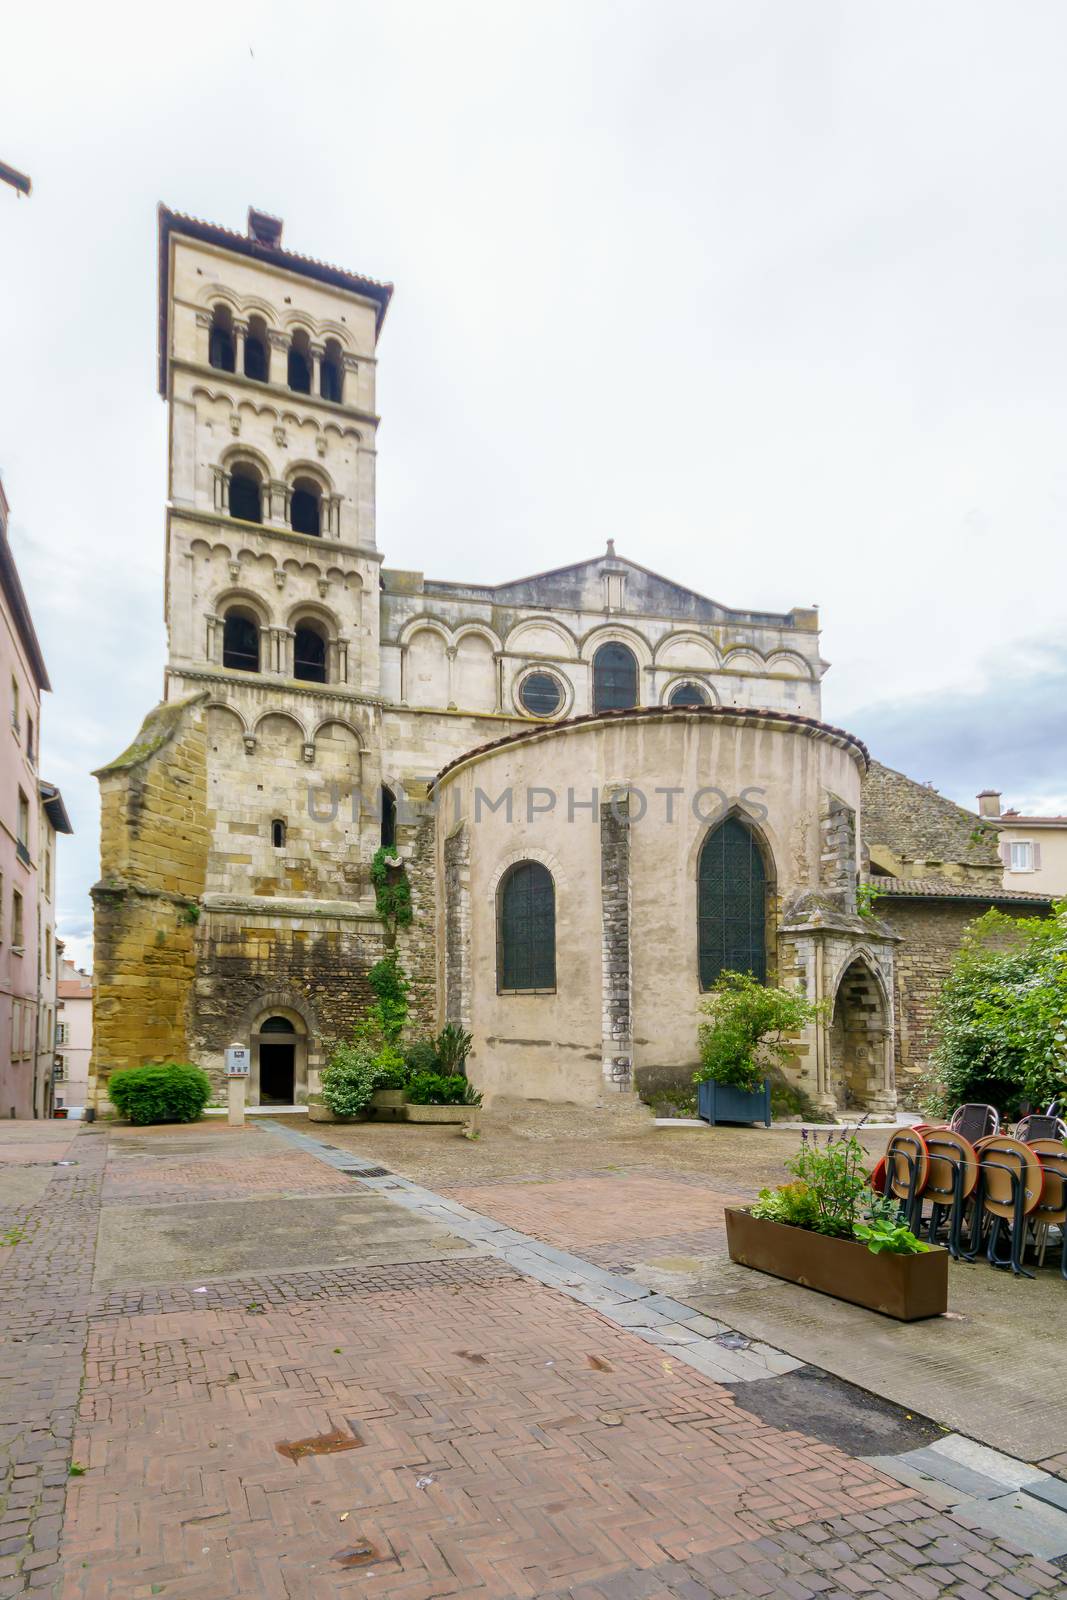 View of the Saint-Andre le Bas Abbey, in Vienne, Isere department, France